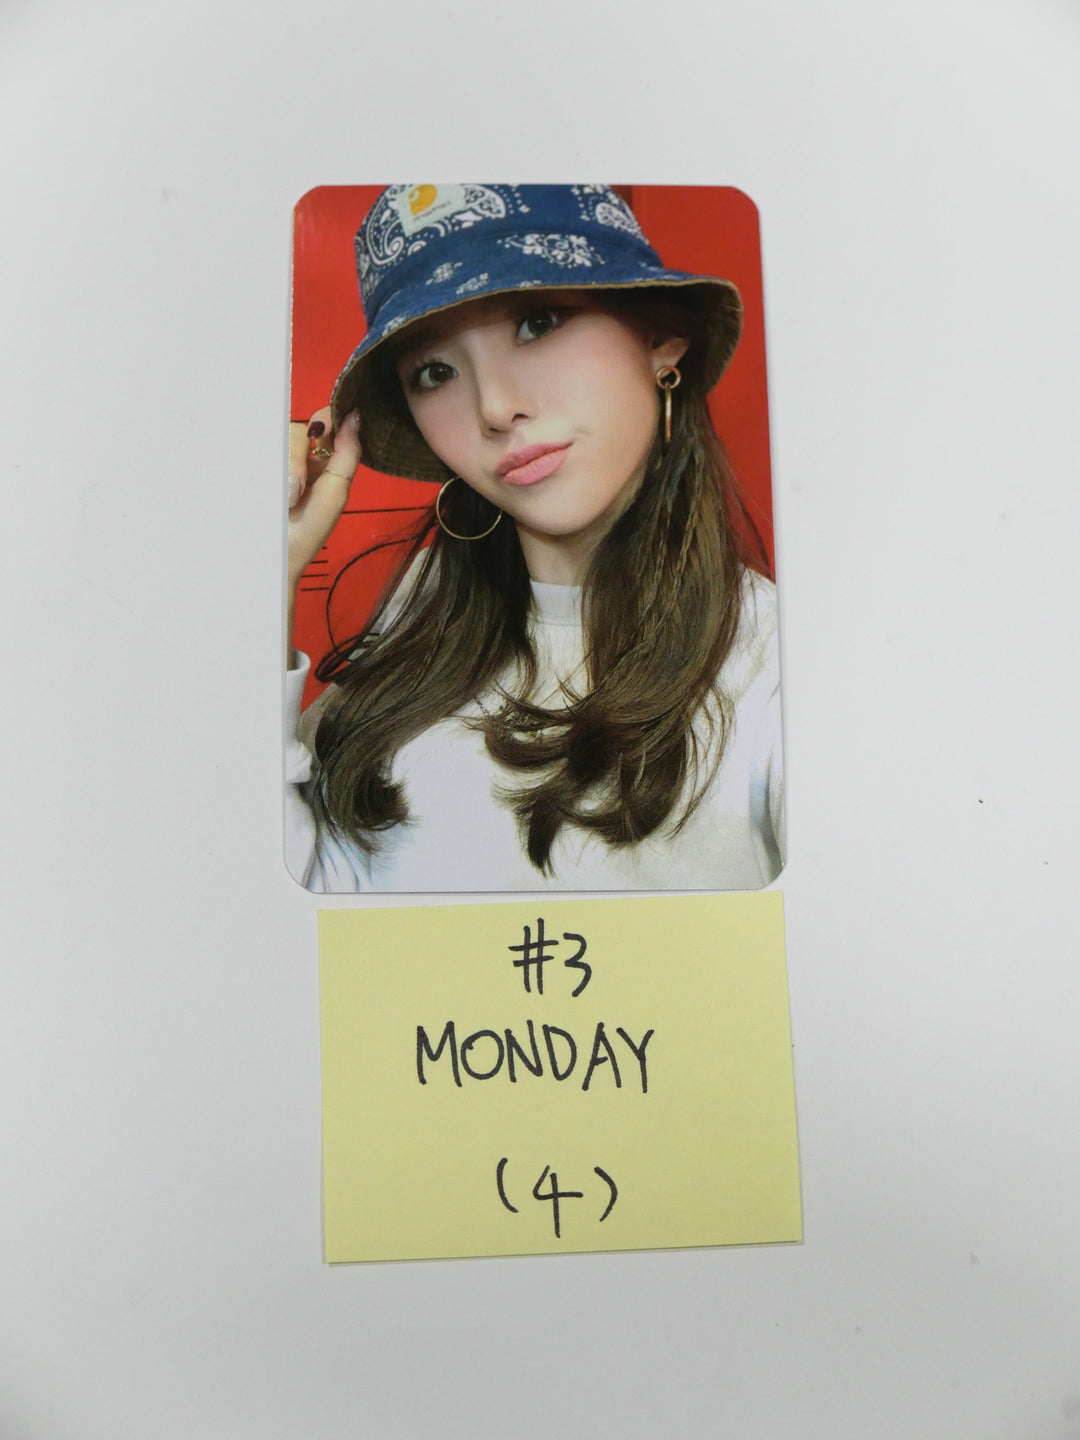 Weeekly "We Play" 3rd mini - Official Photocard (updated 3.31)